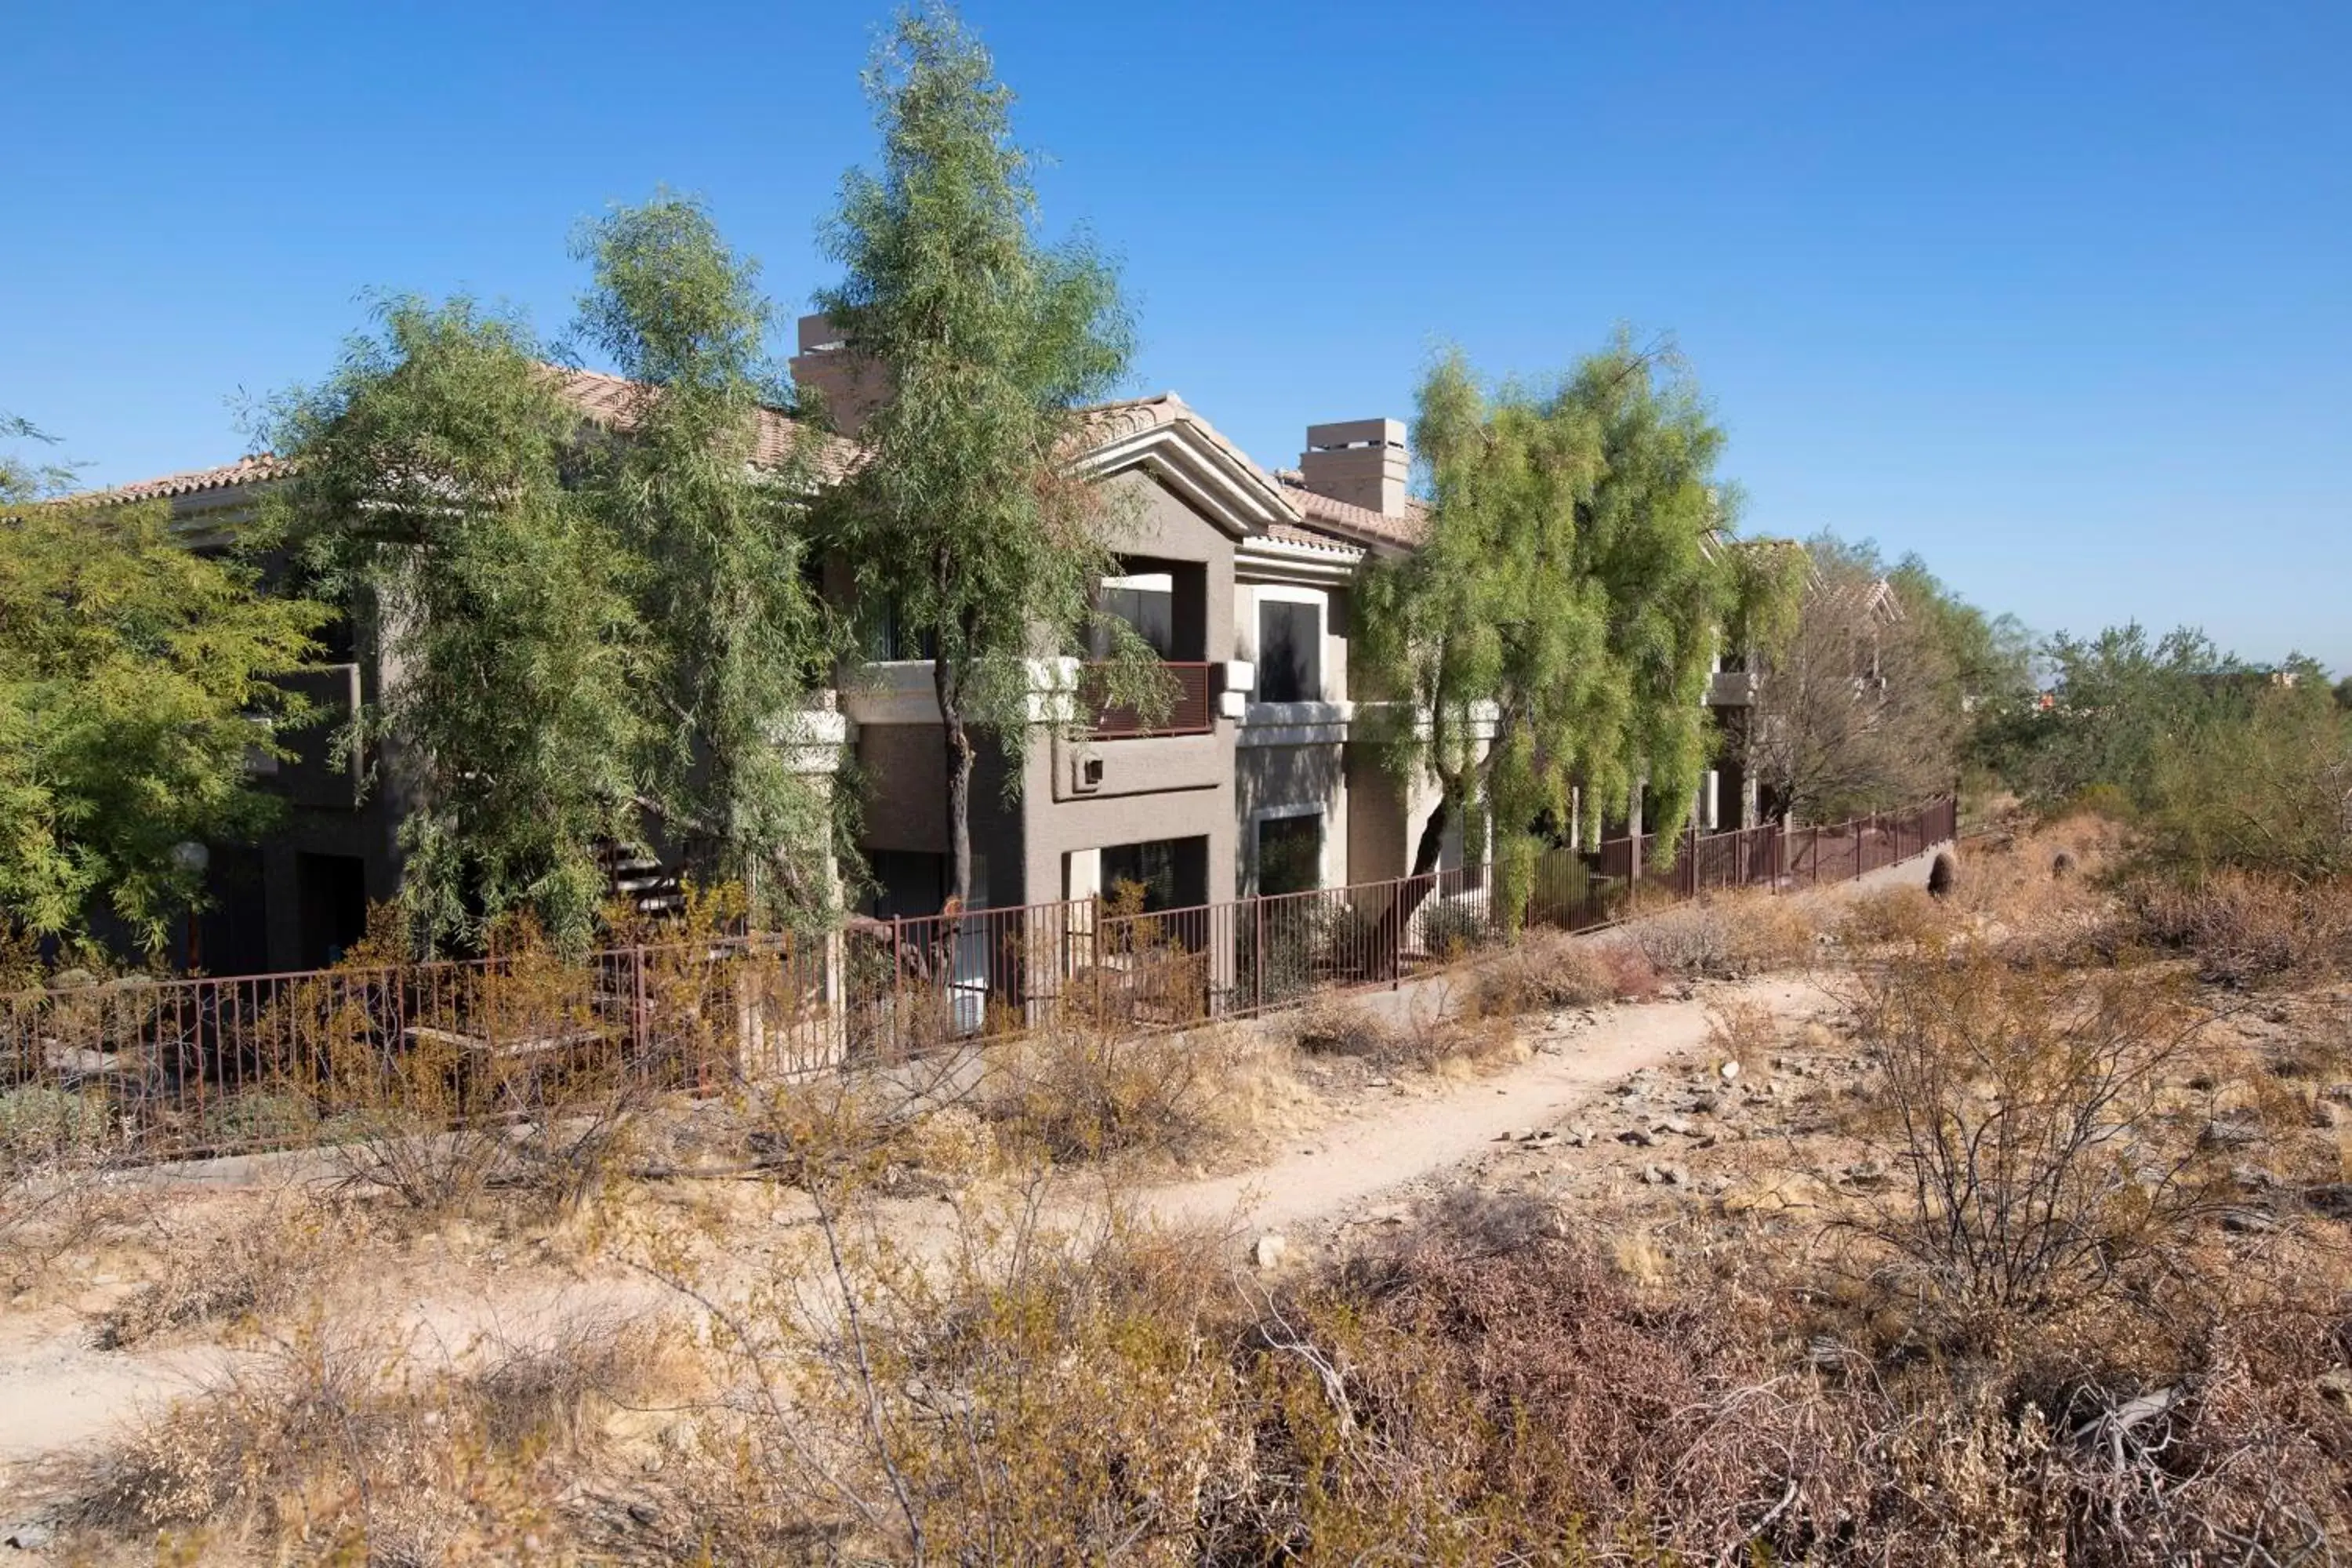 Other, Property Building in Raintree at Phoenix South Mountain Preserve